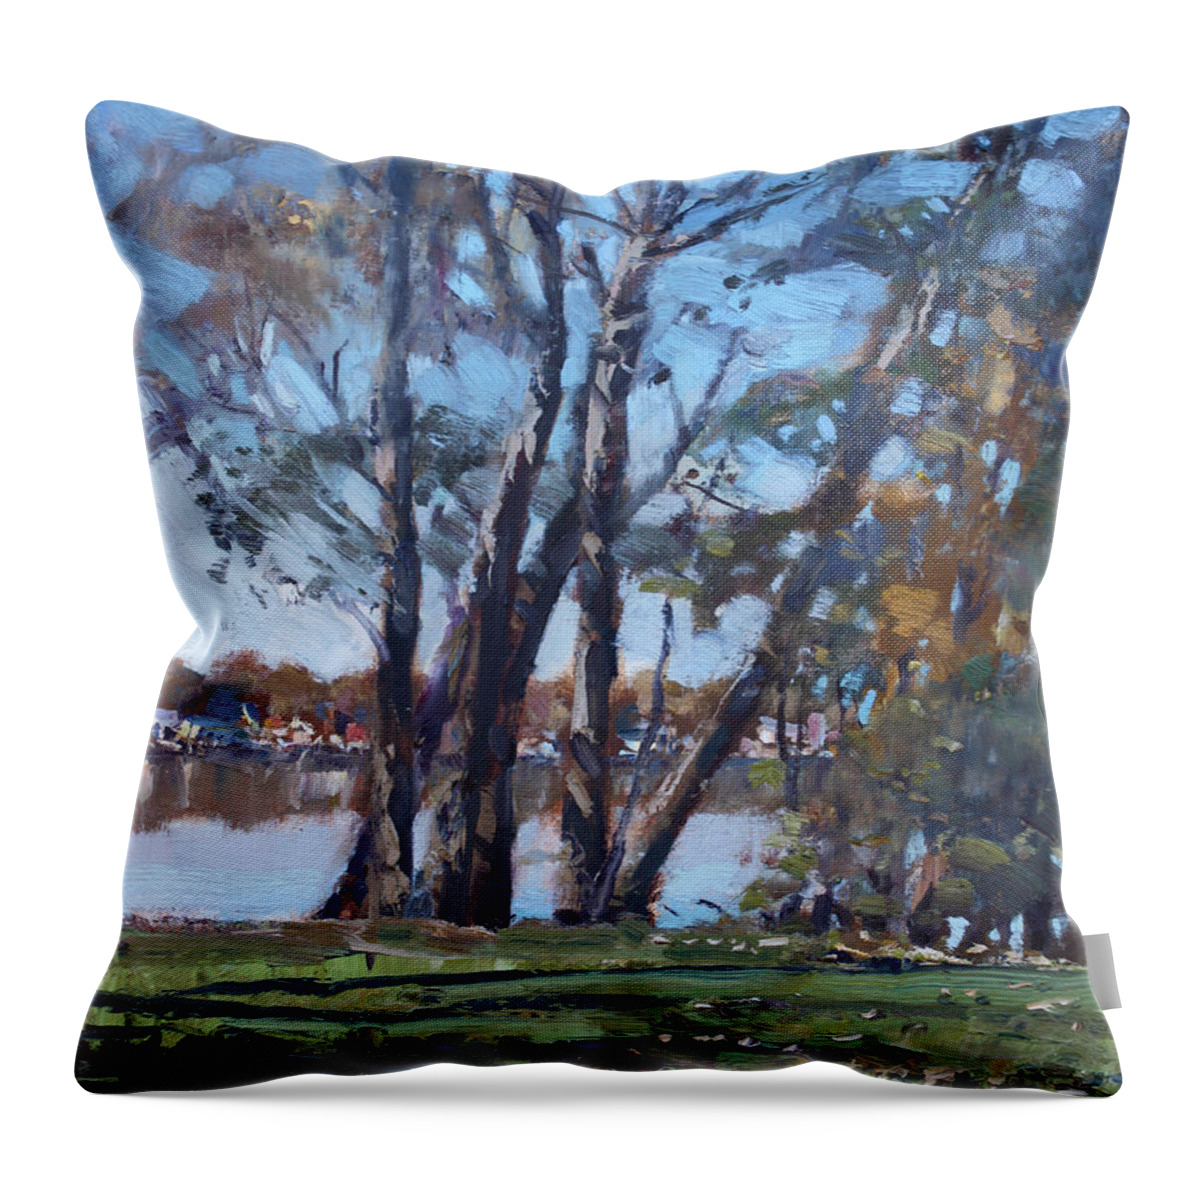 Trees Throw Pillow featuring the painting Trees by the River by Ylli Haruni